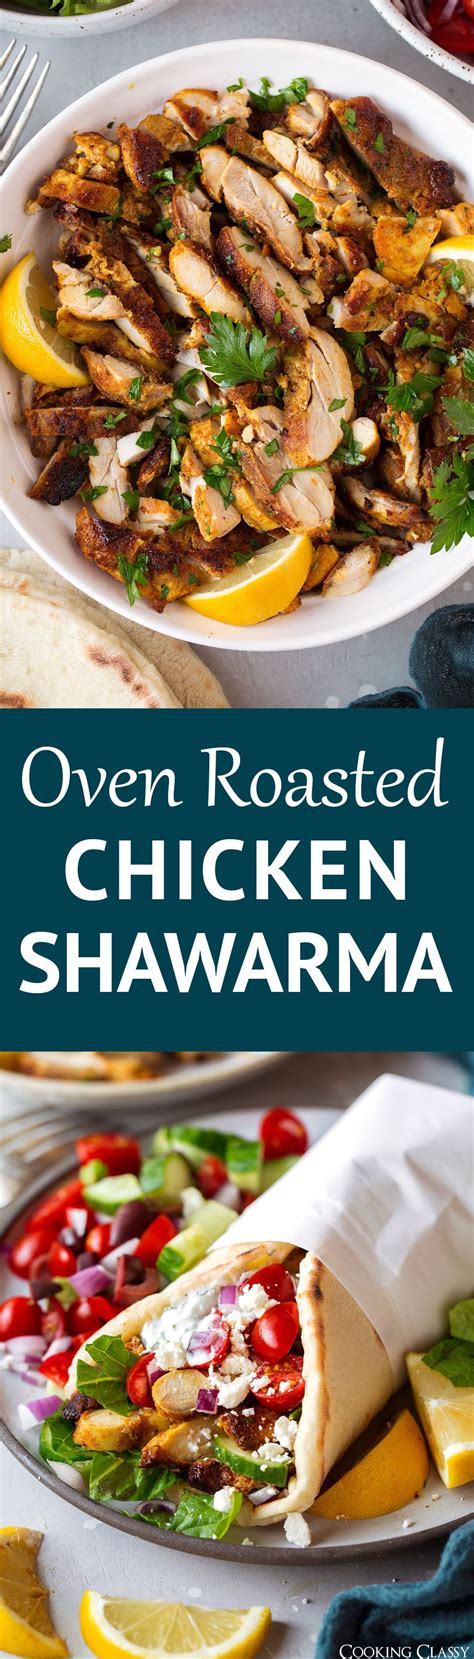 Oven Roasted Chicken Shawarma Its Is All Of My Dinner Dreams Come